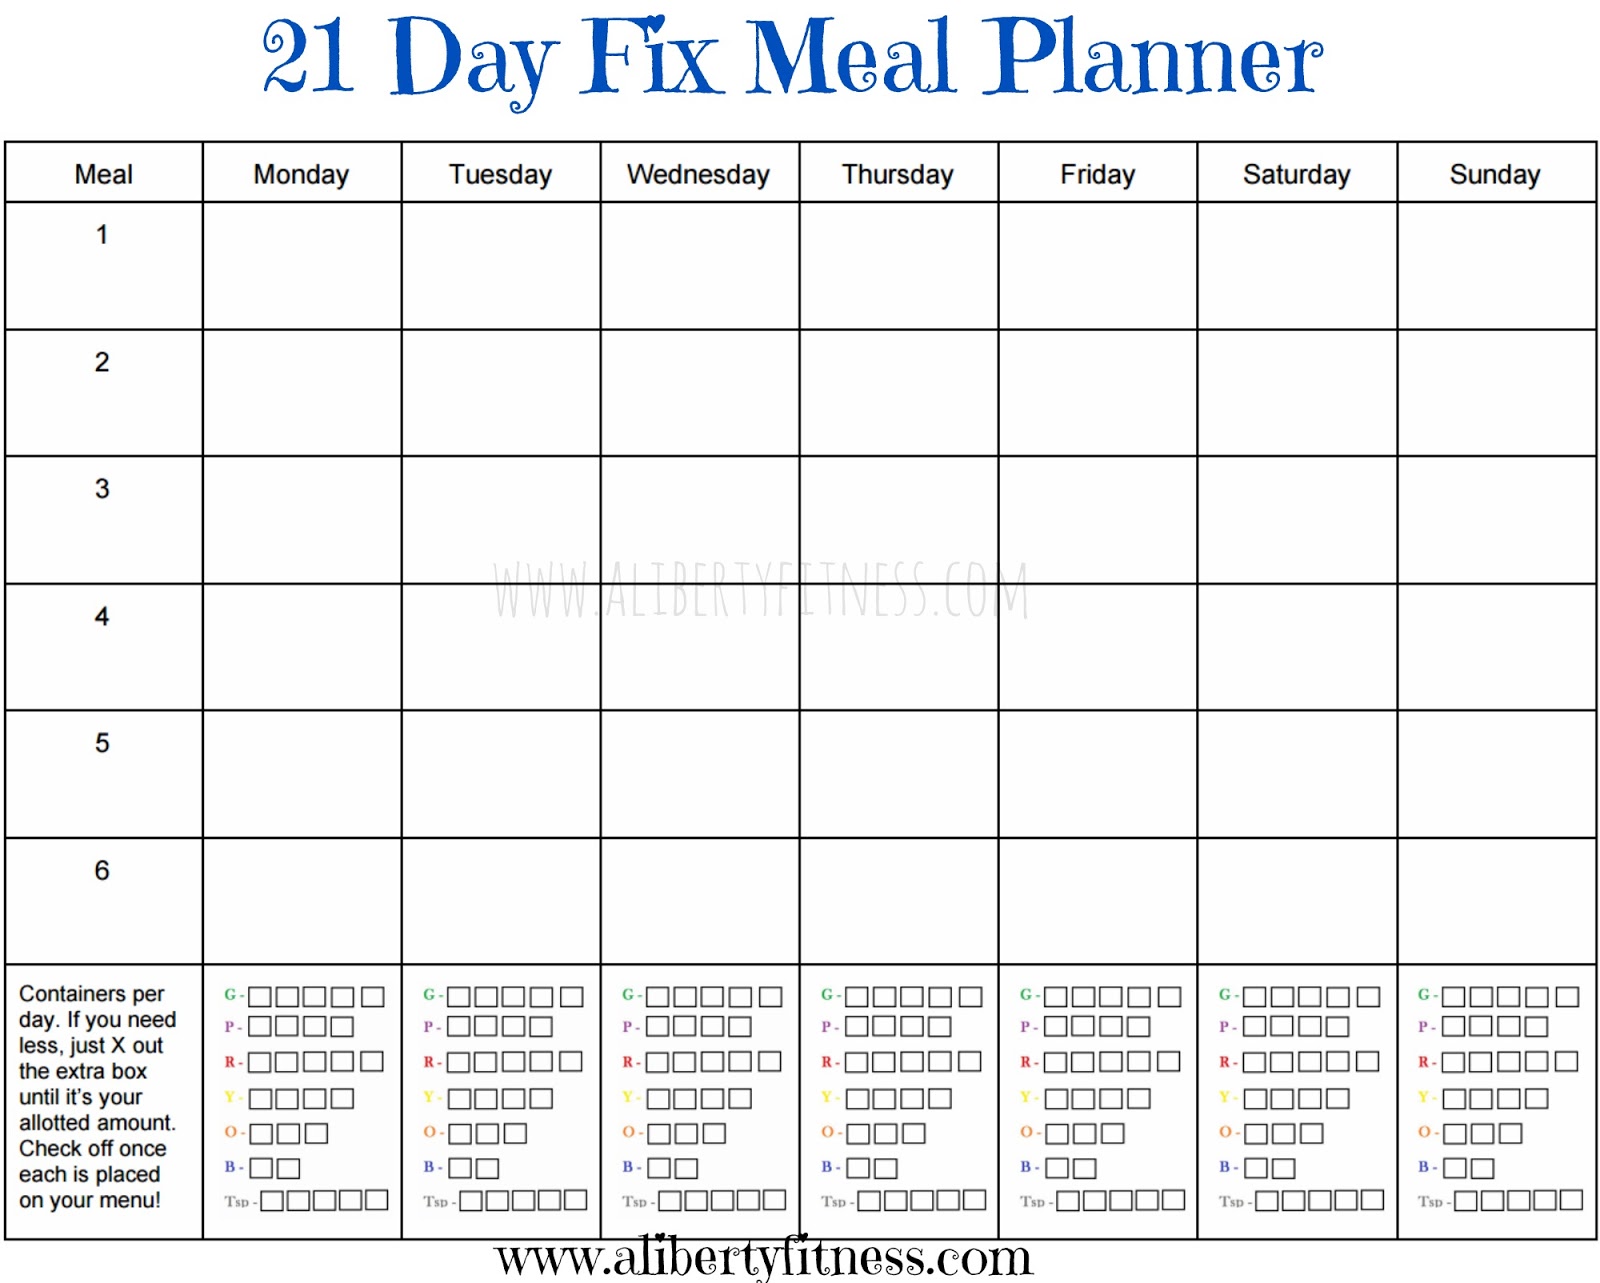 Grace & Grit: 21 Day Fix Meal Planner and Grocery List